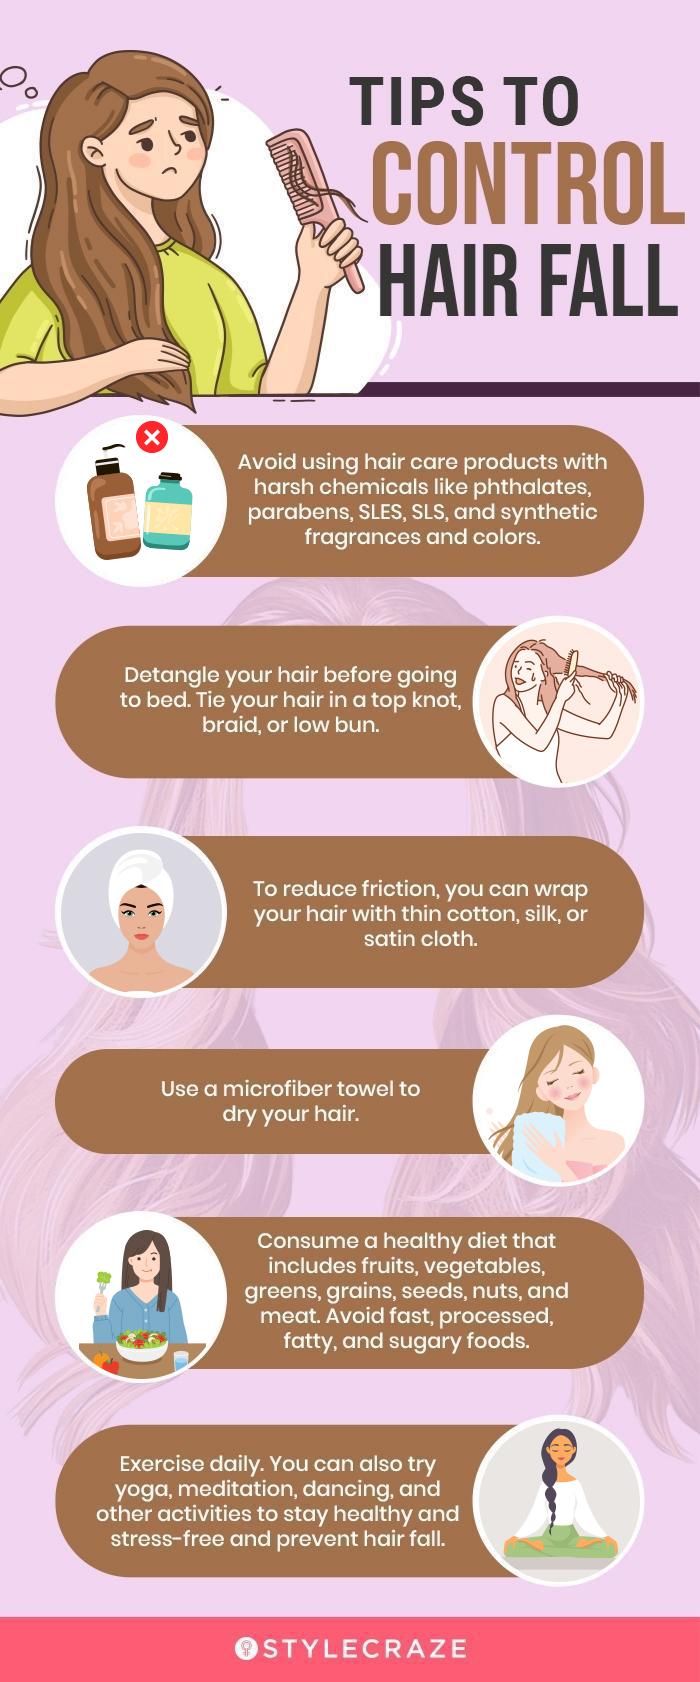 7 Simple Home Remedies to Control Hair Fall